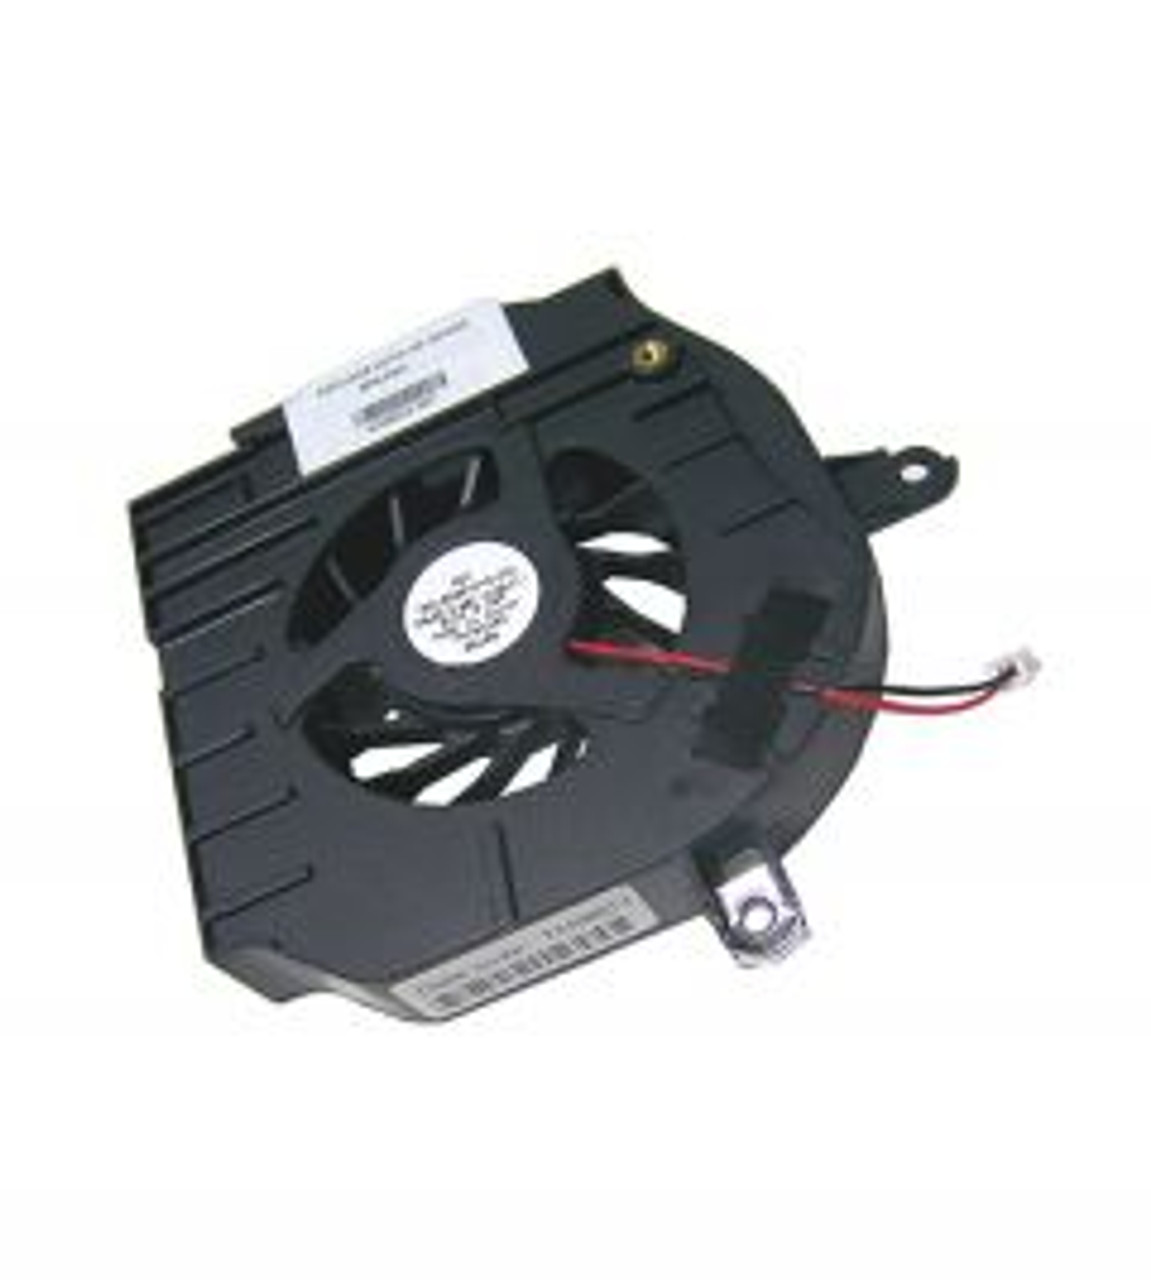 730792-001 | Hp | Fan For Zbook 14 G2 Mobile Workstation